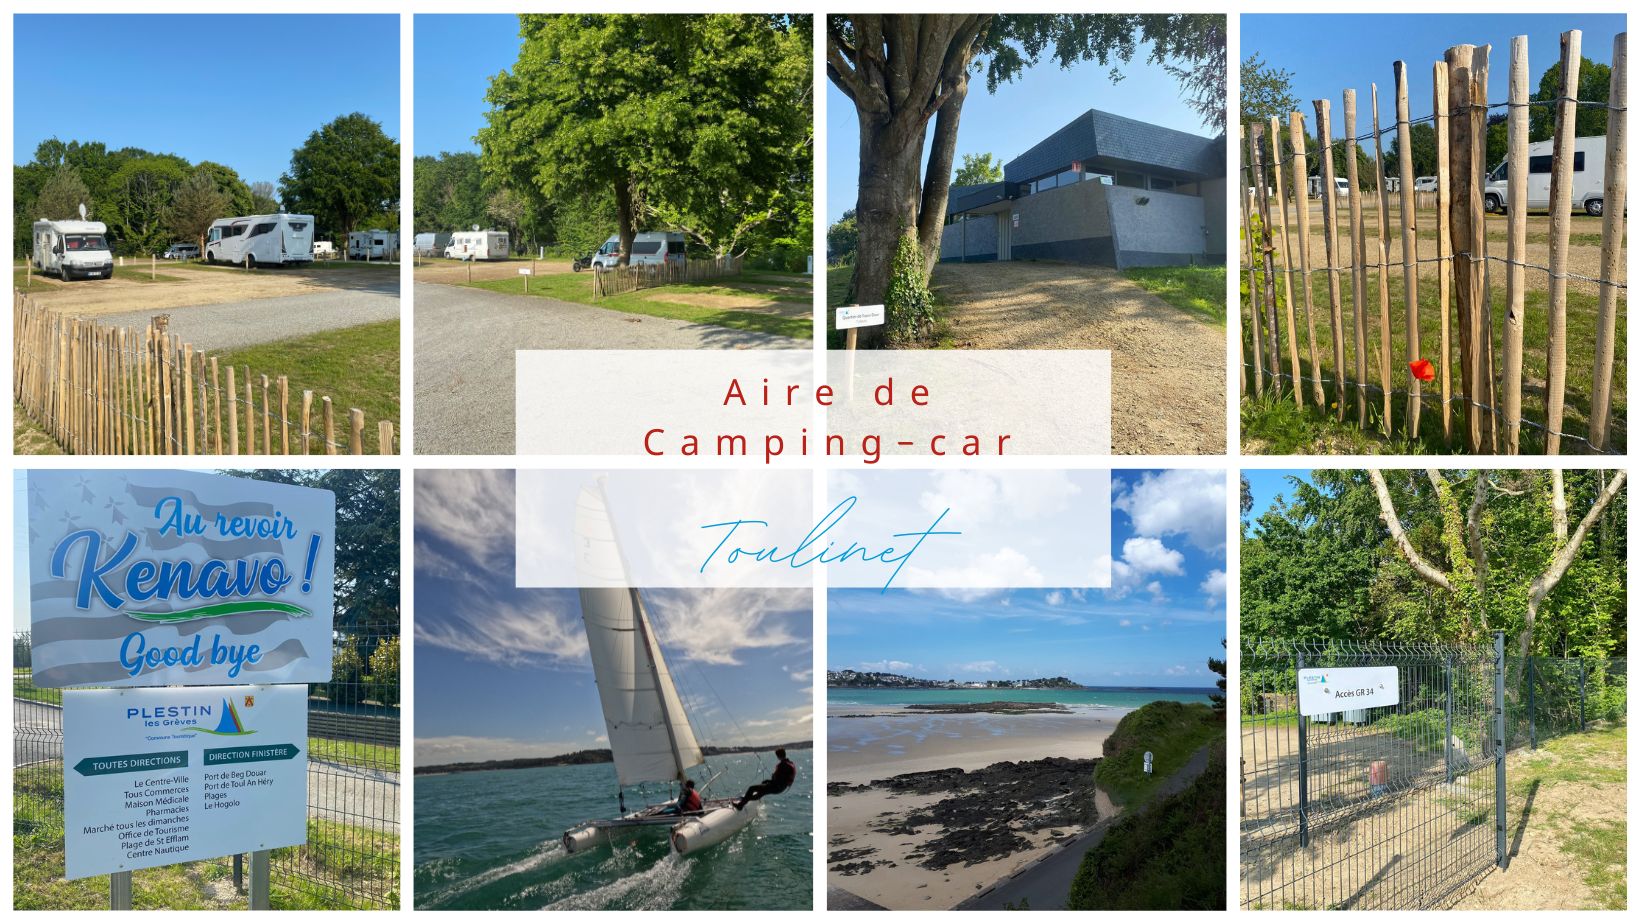 aire-camping-car-toulinet-plestin.jpg